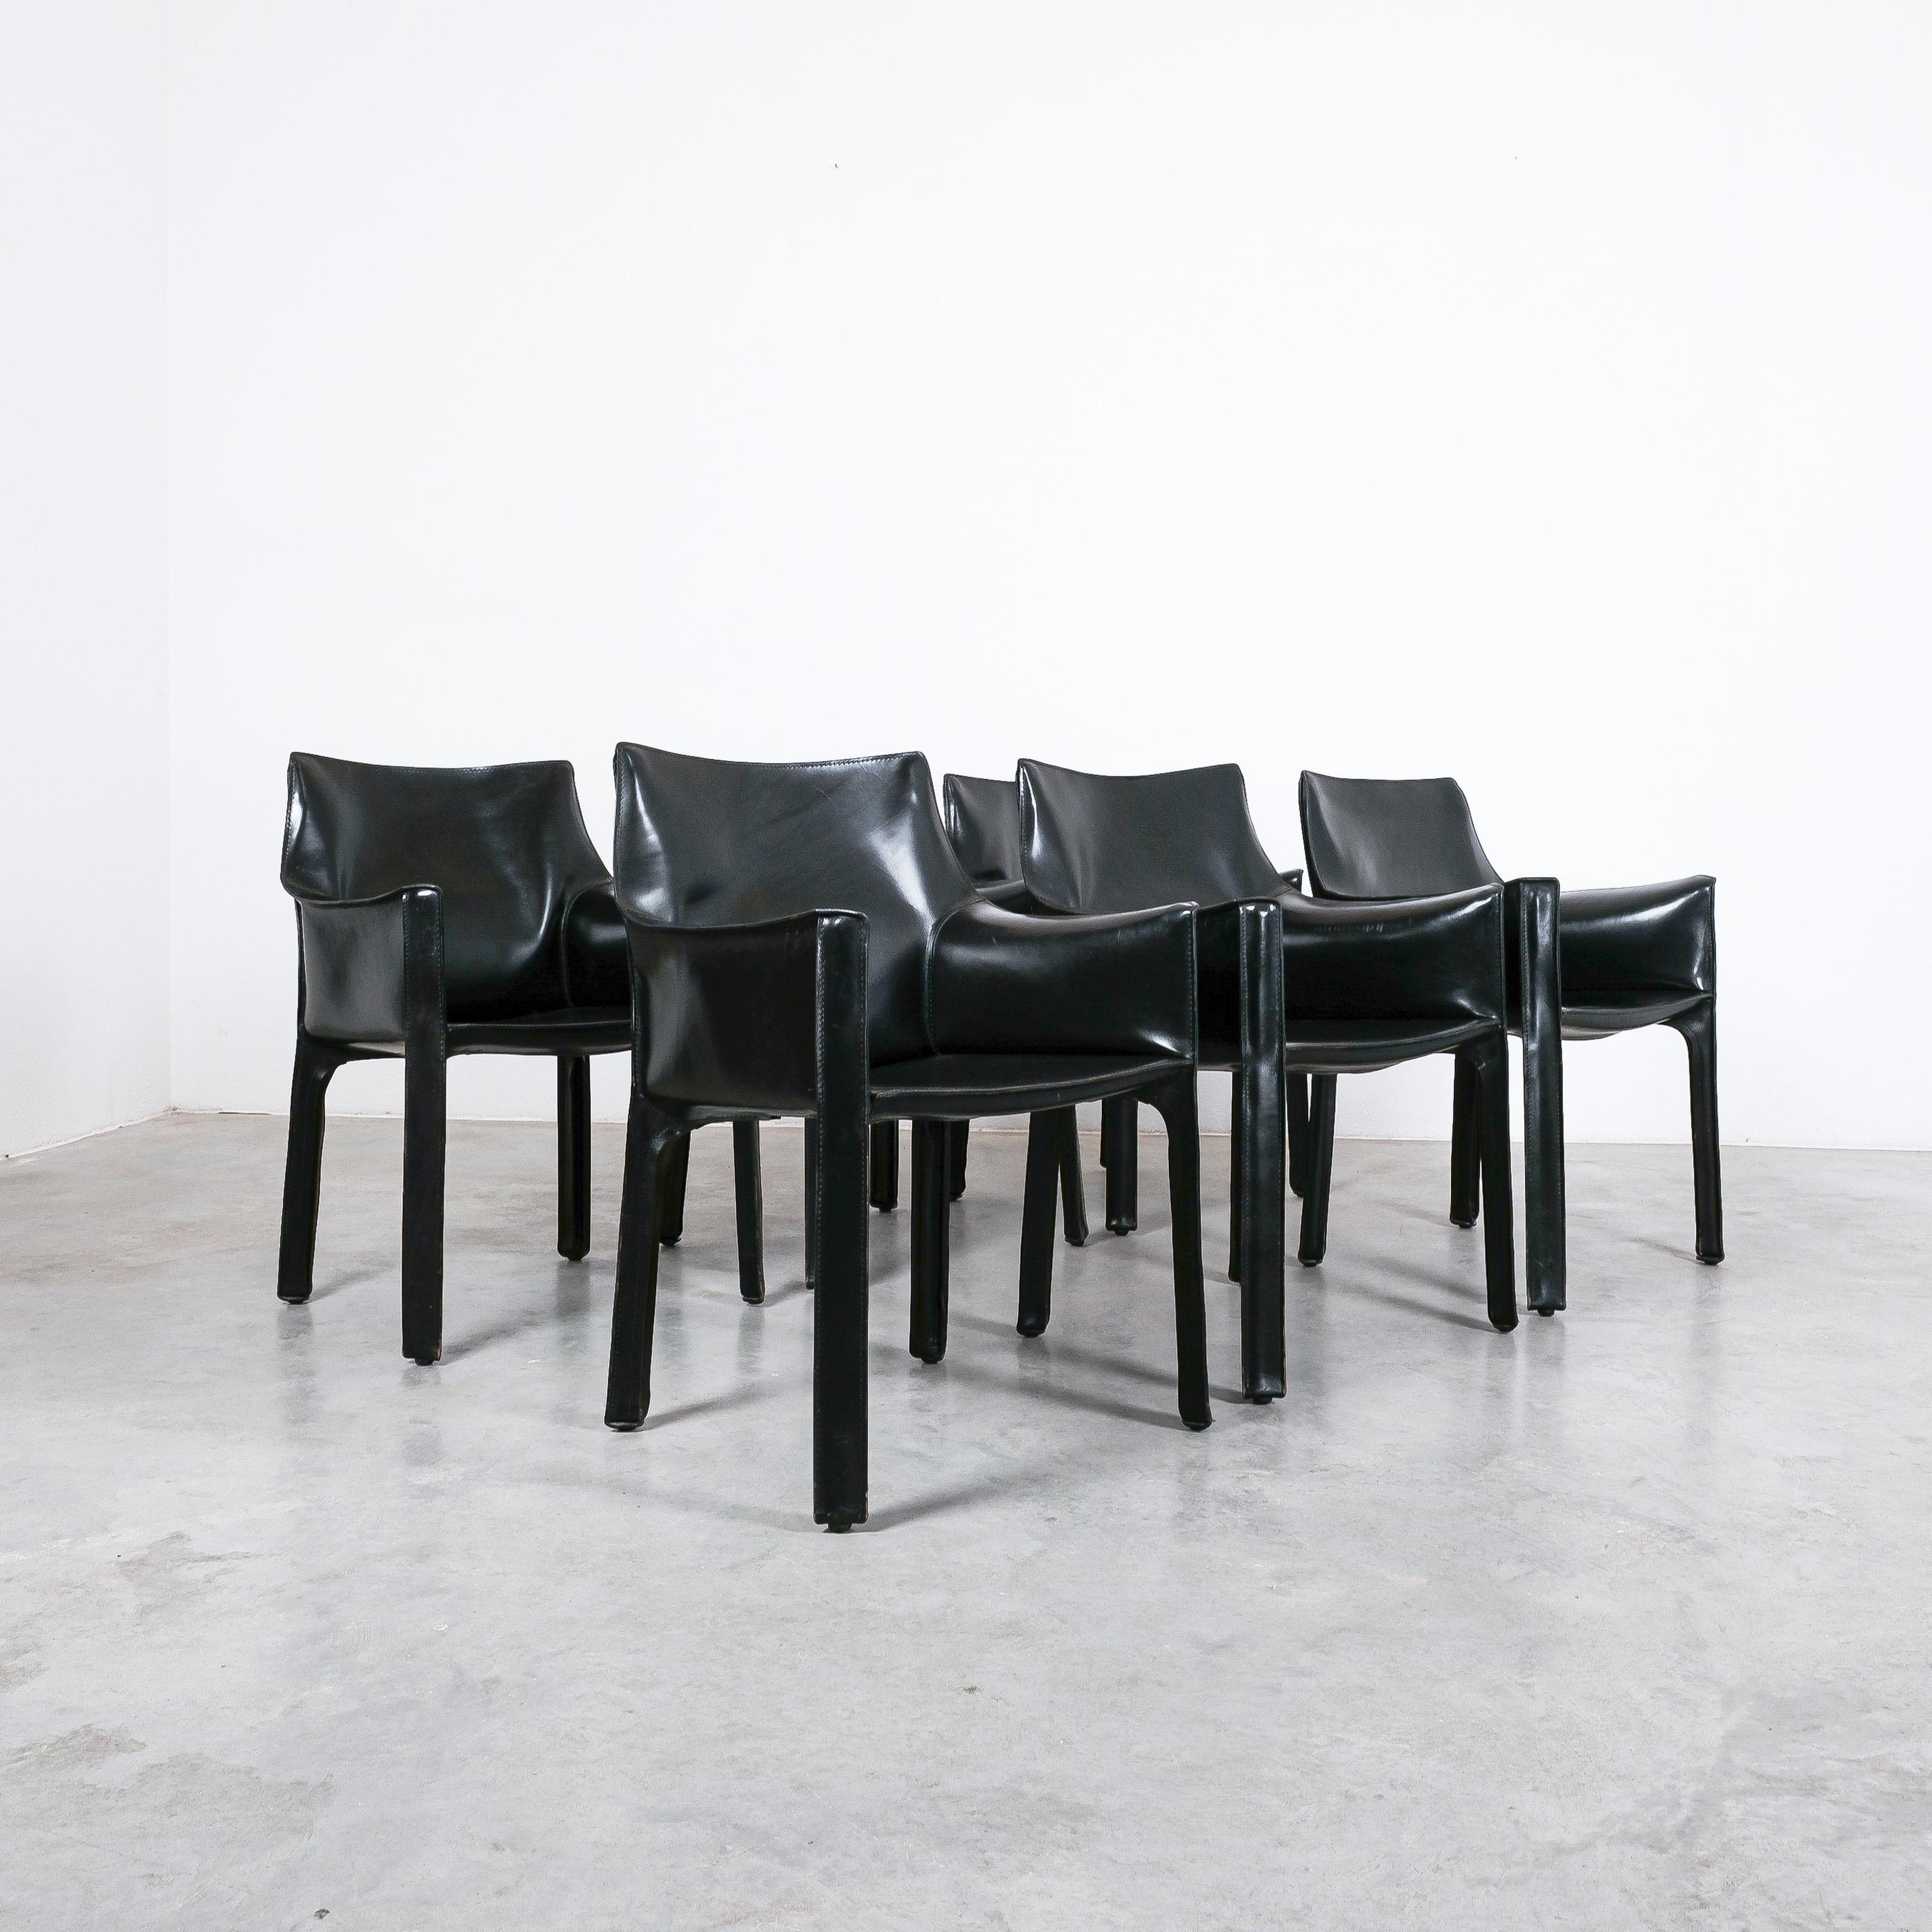 Steel Mario Bellini Cab 413 Set of 6 Black Leather Dining Chairs, Italy